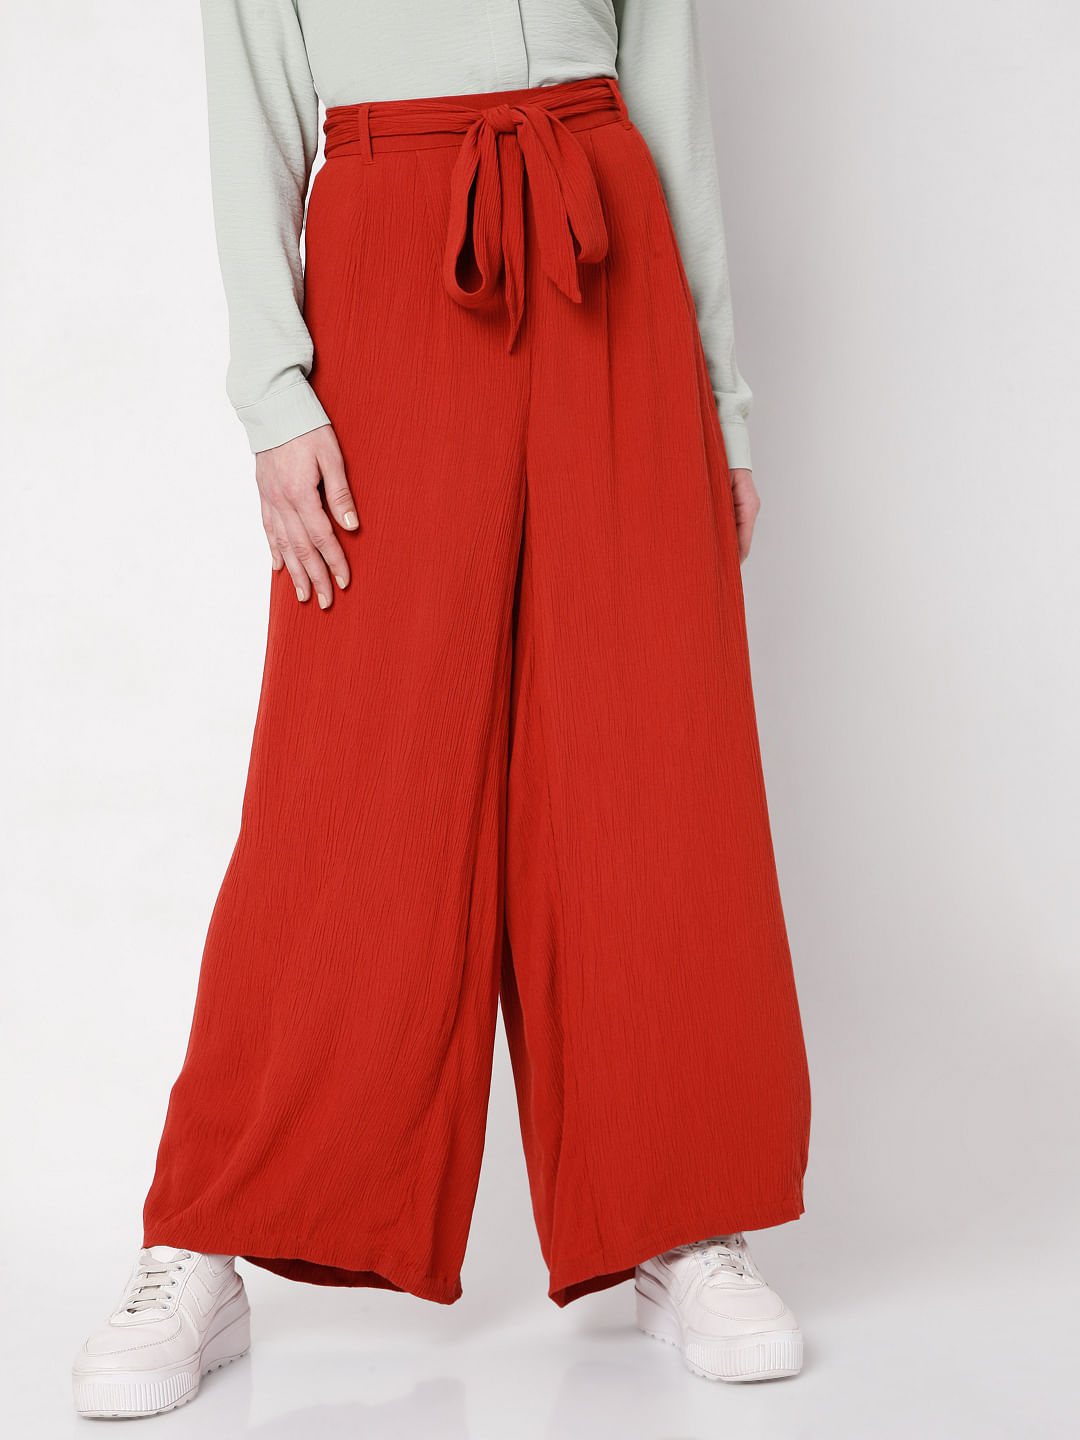 Buy Online Red Cotton Pants for Women  Girls at Best Prices in Biba India COREBOT16004SS20RED